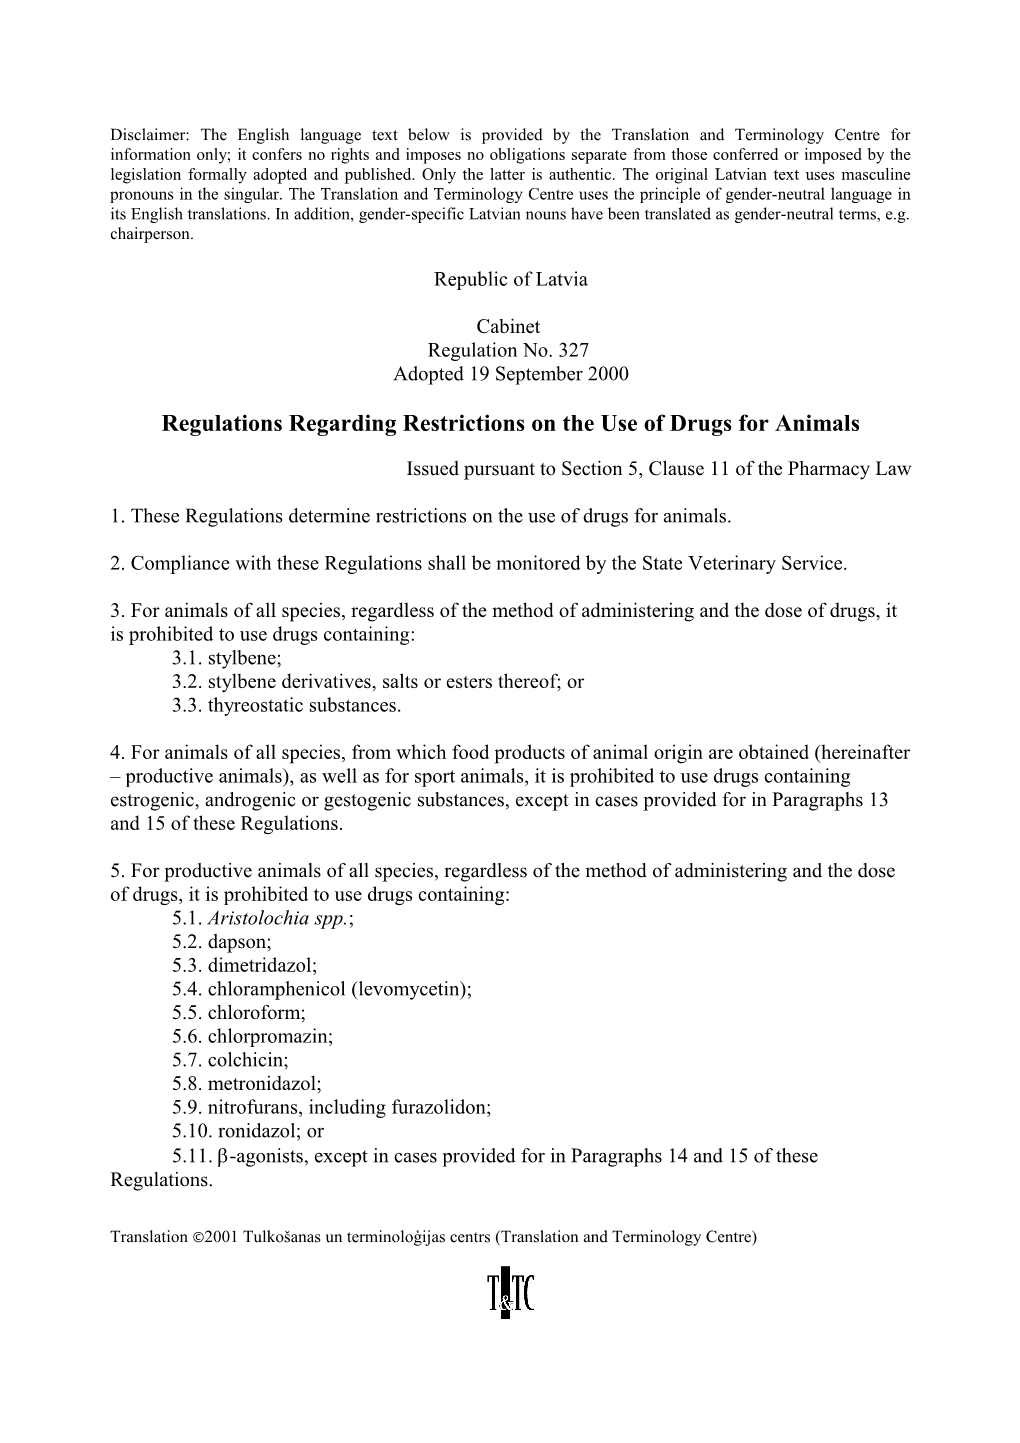 Regulations Regarding Restrictions on the Use of Drugs for Animals